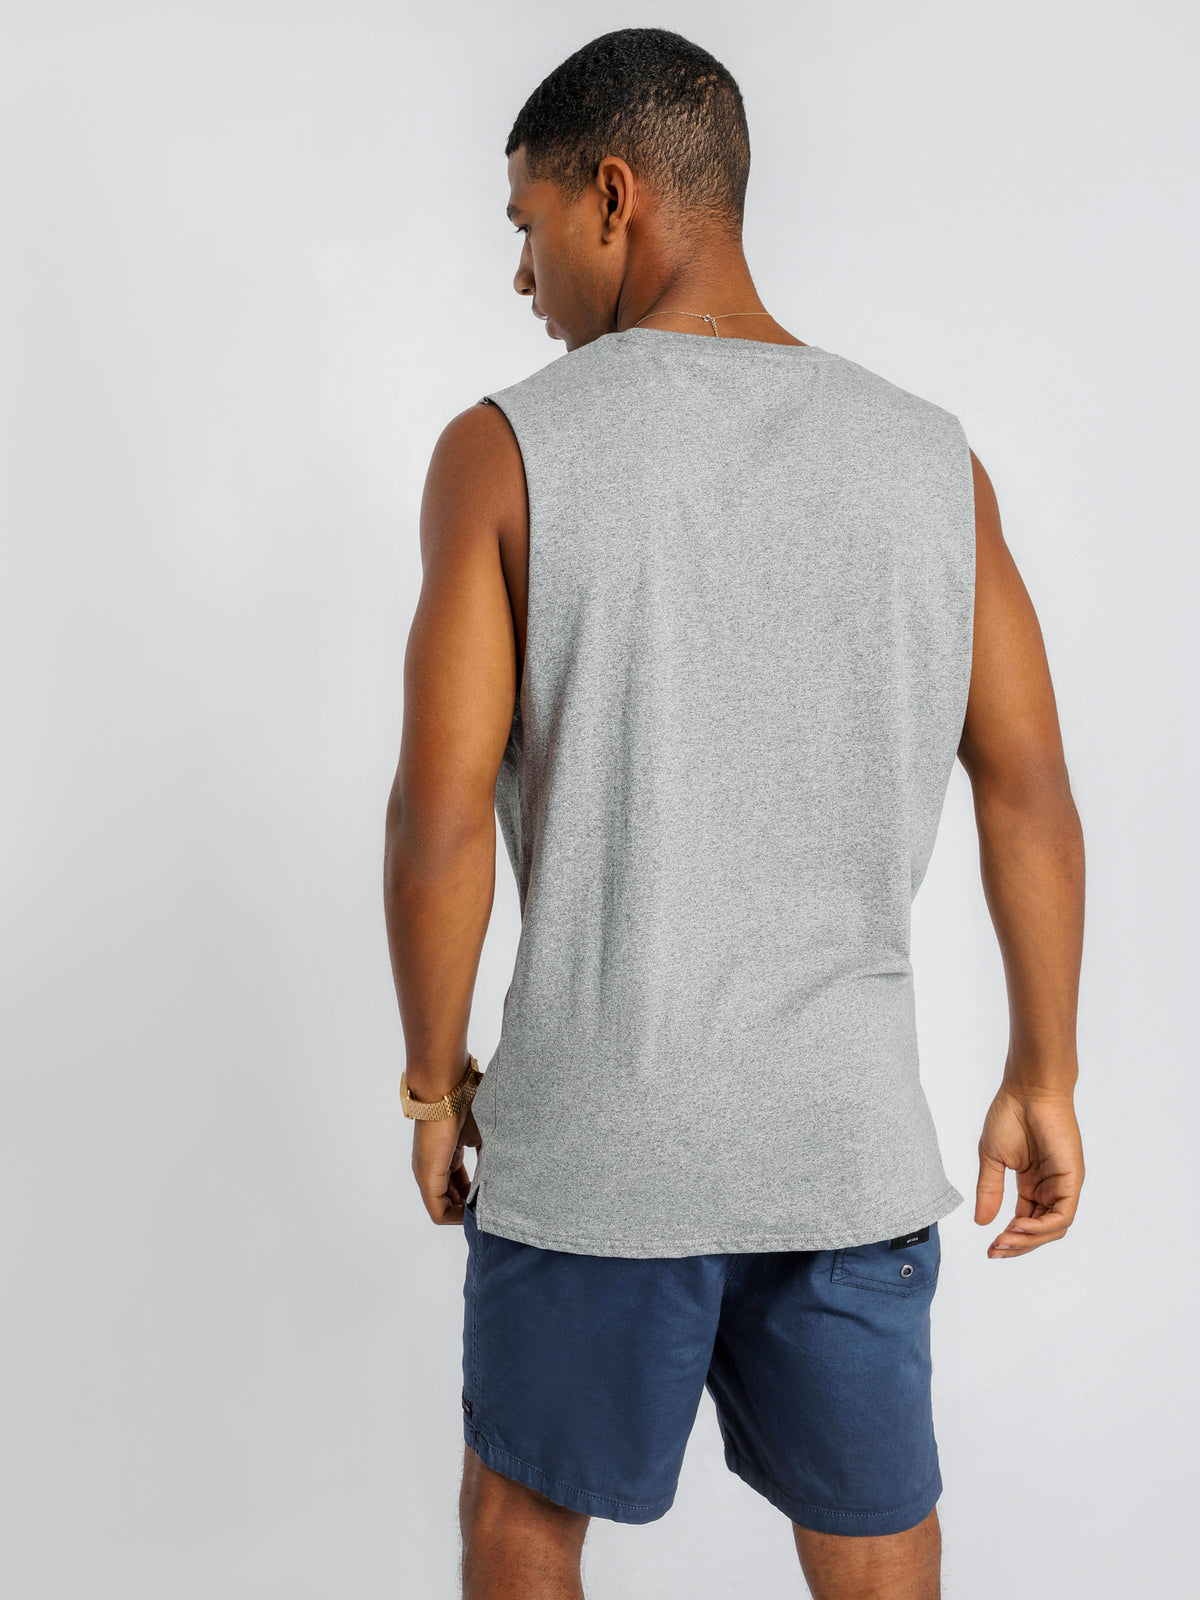 Basic Muscle Tank in Charcoal